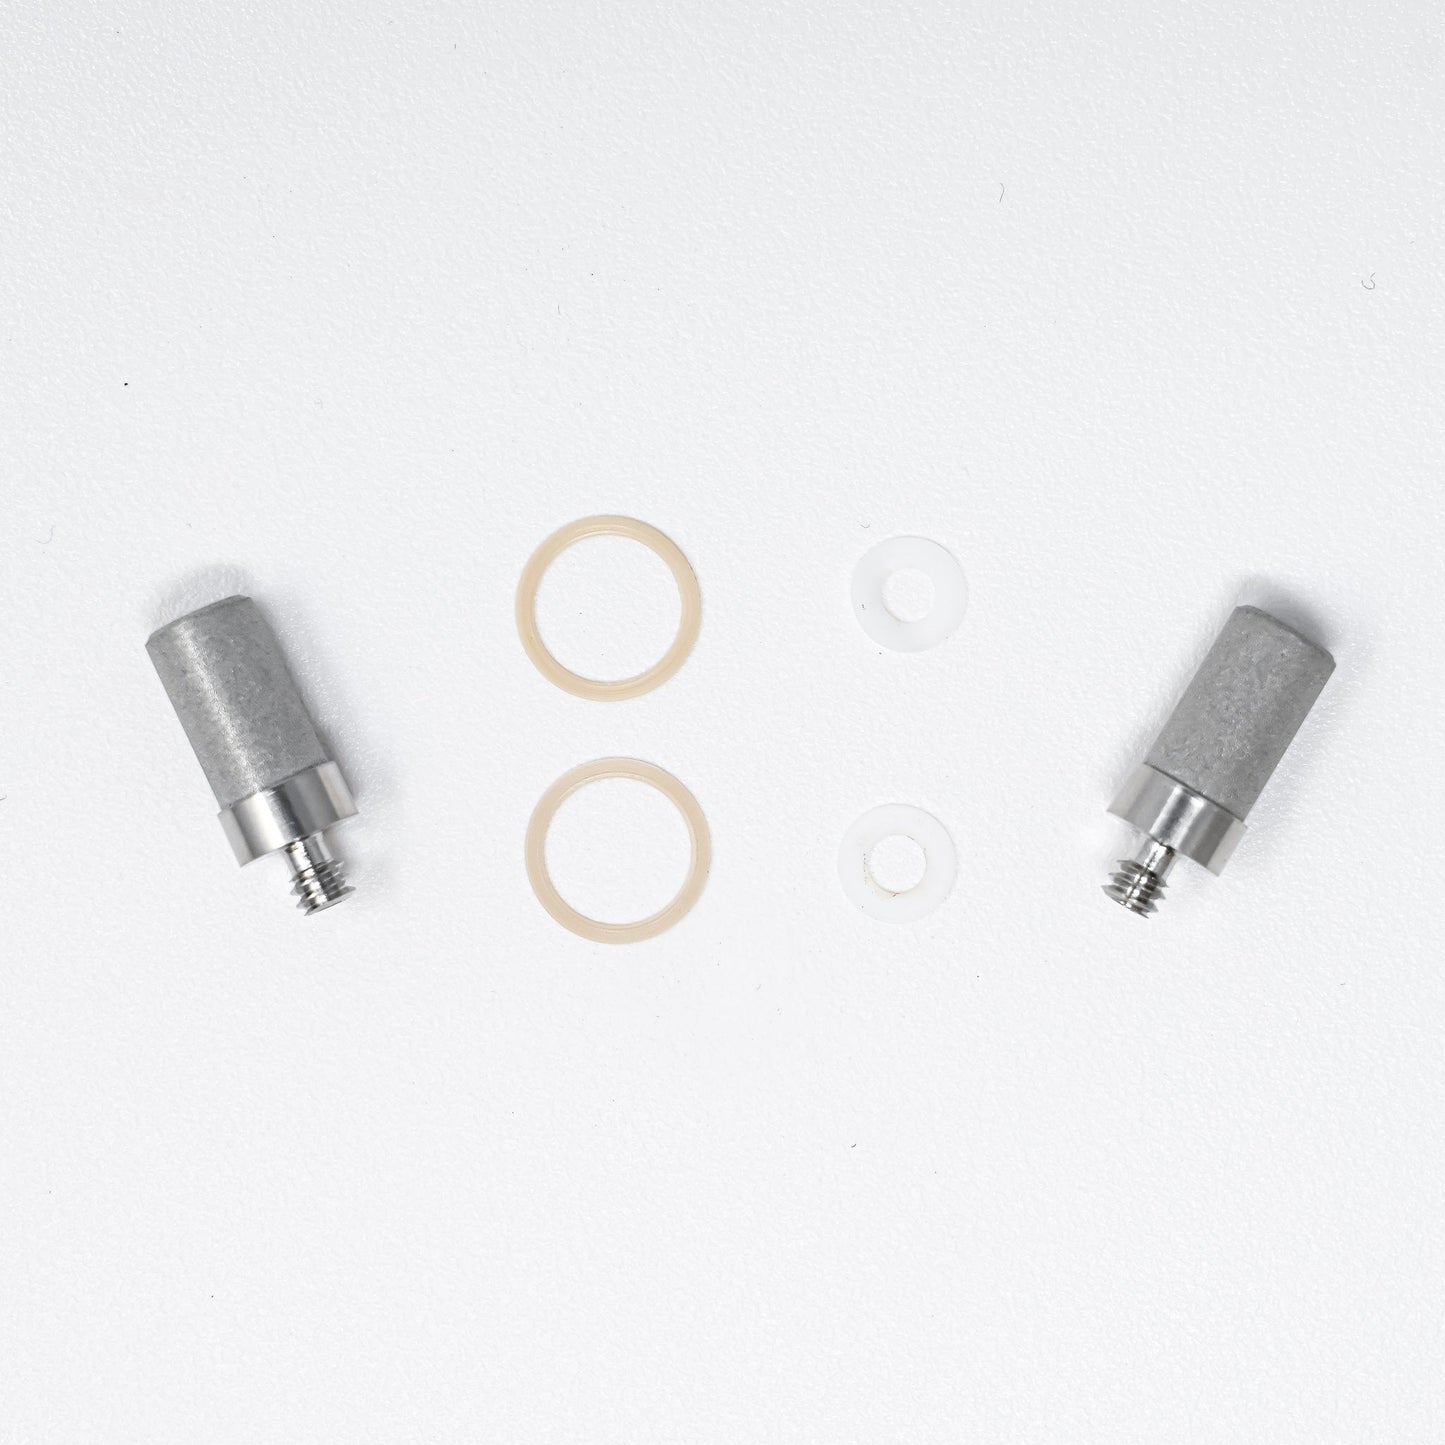 Cylindrical filter element with o-rings and gaskets.